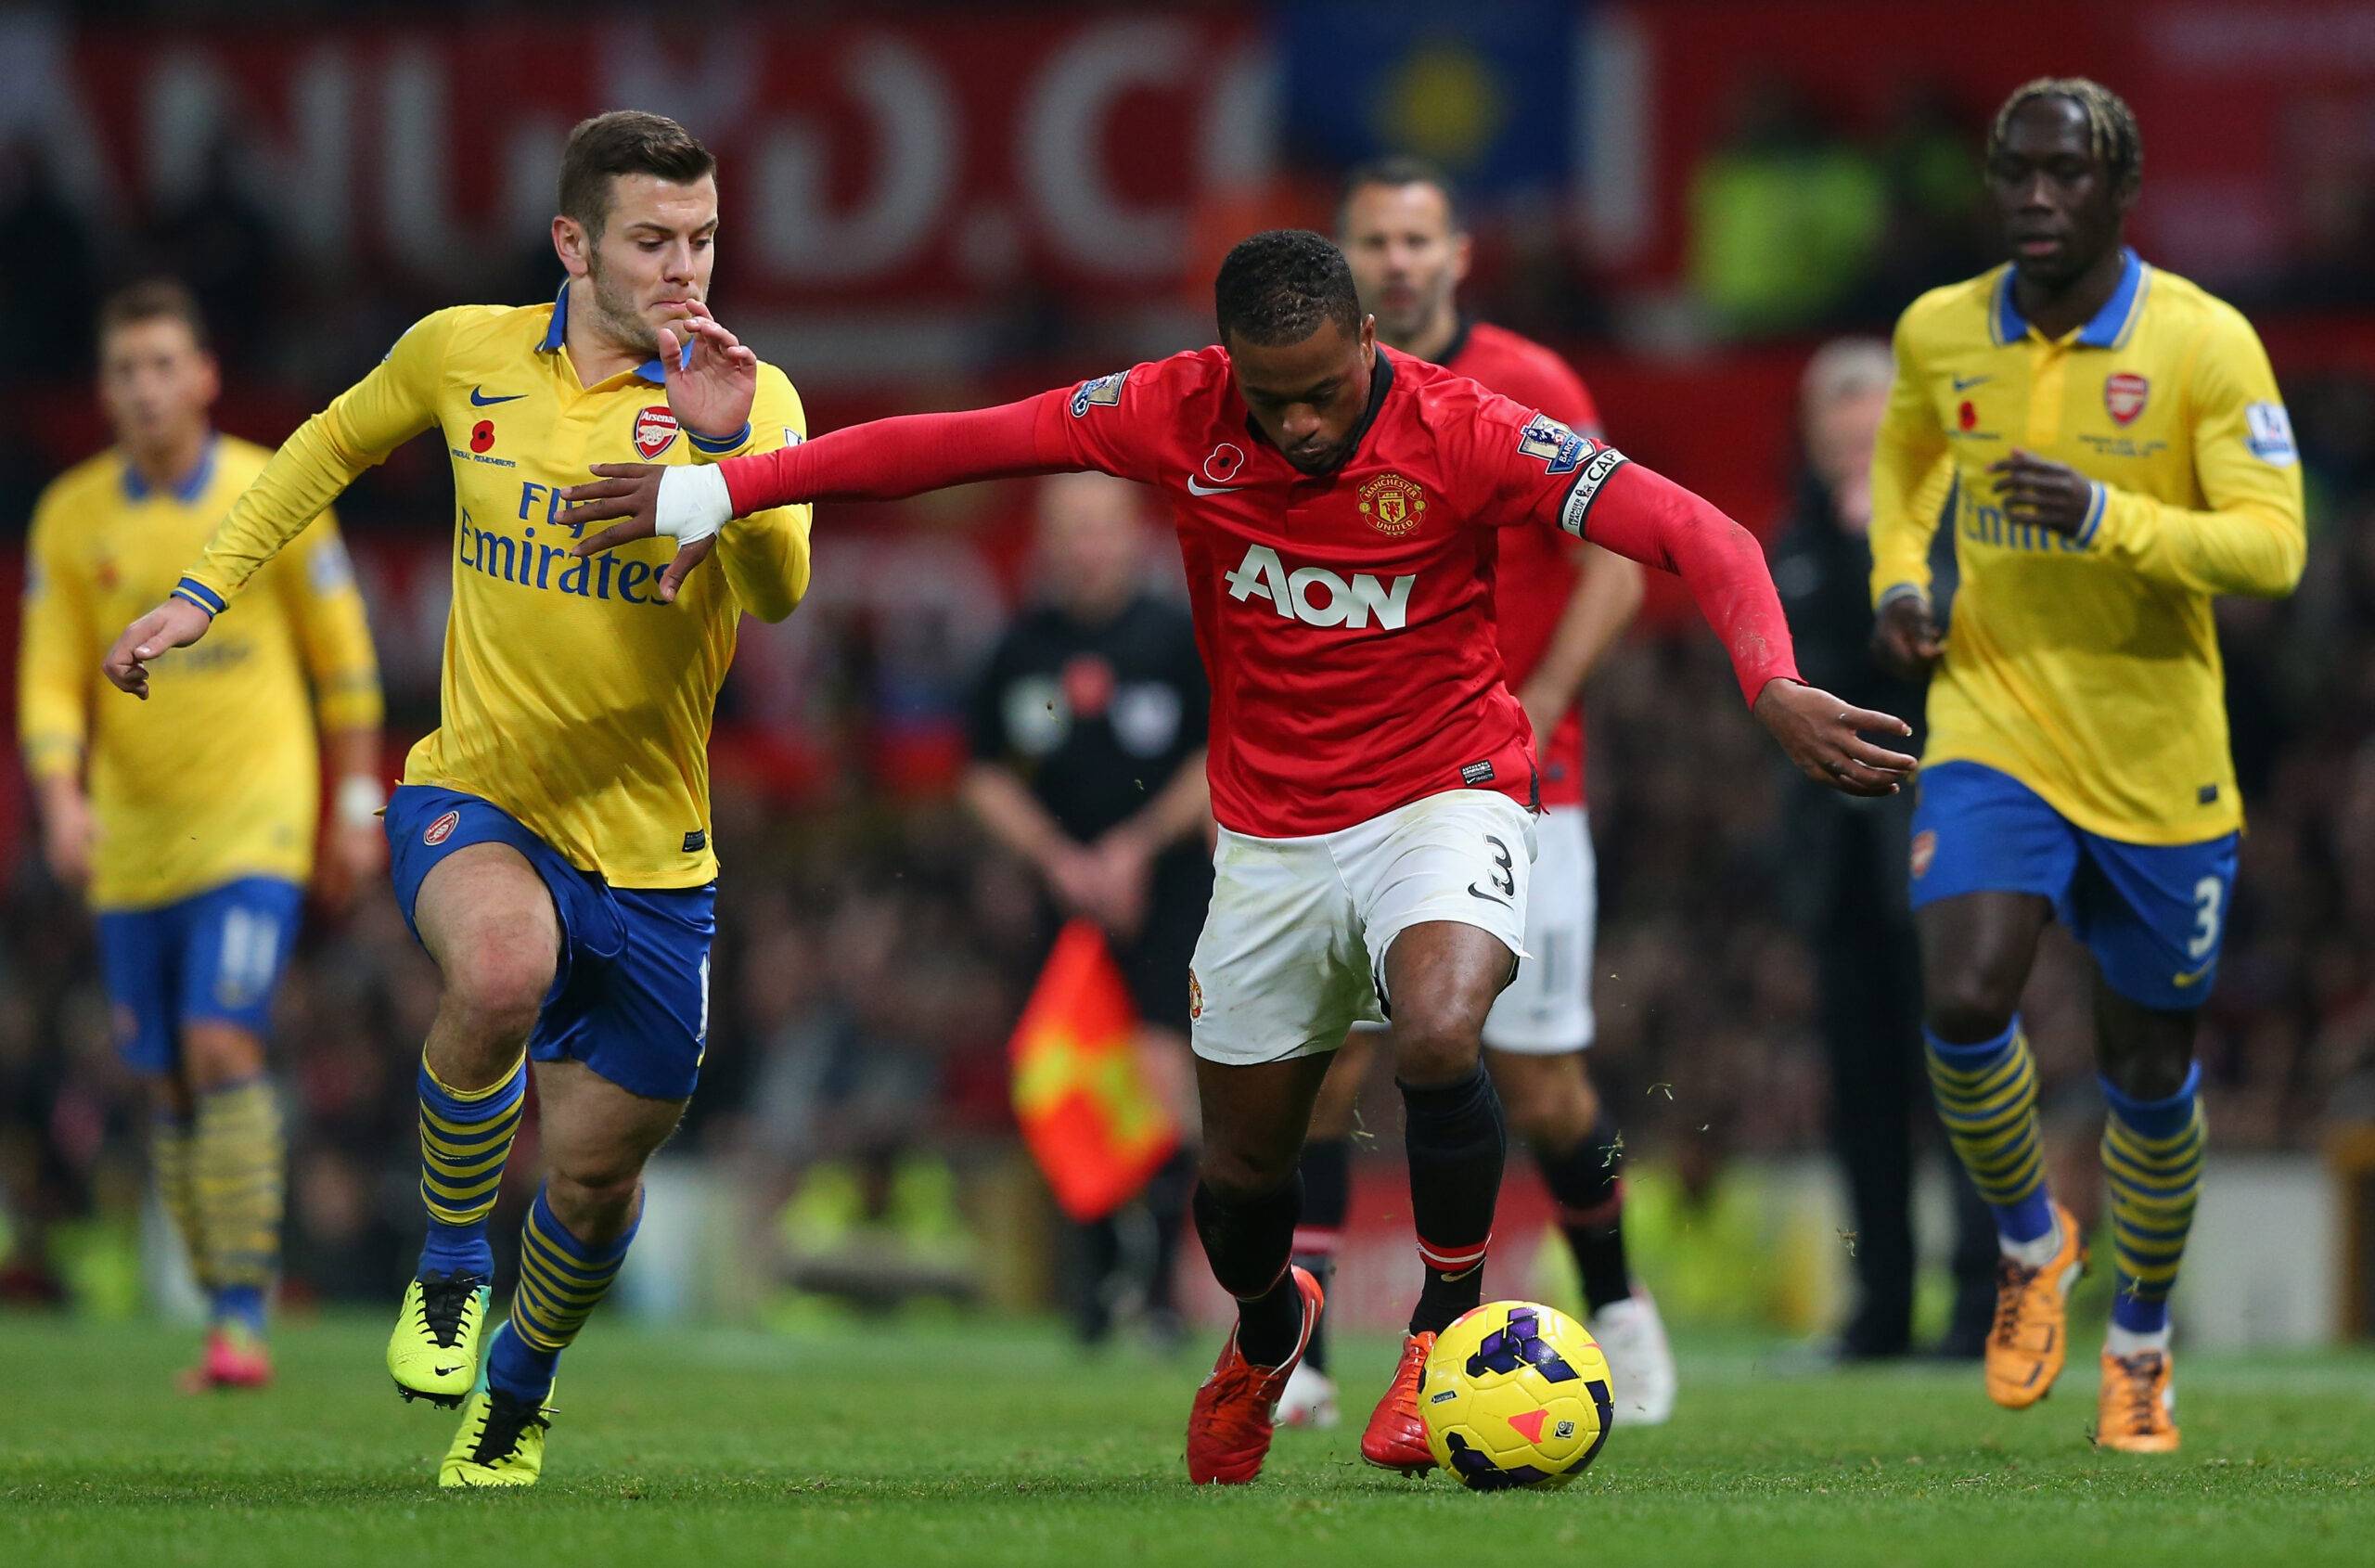 Patrice Evra’s stories from his Man Utd years will be tough for Arsenal fans to hear